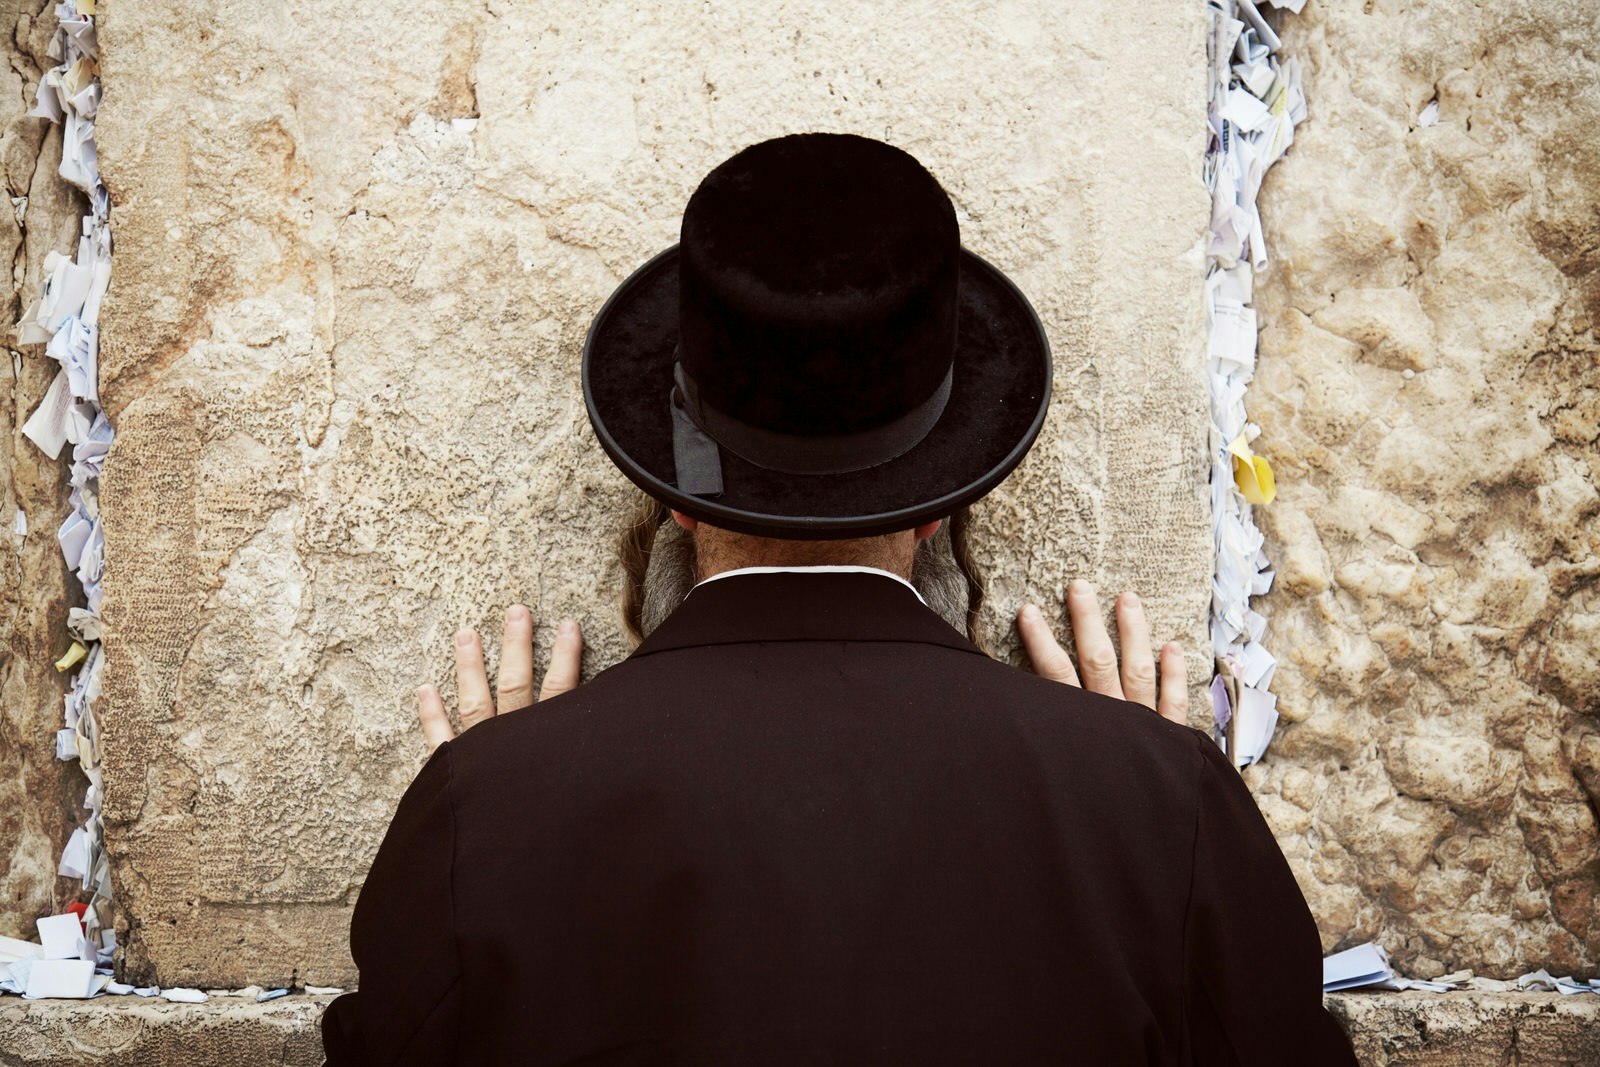 Man praying at the Western Wall in Jerusalem © mimmopellicola.com / Getty Images